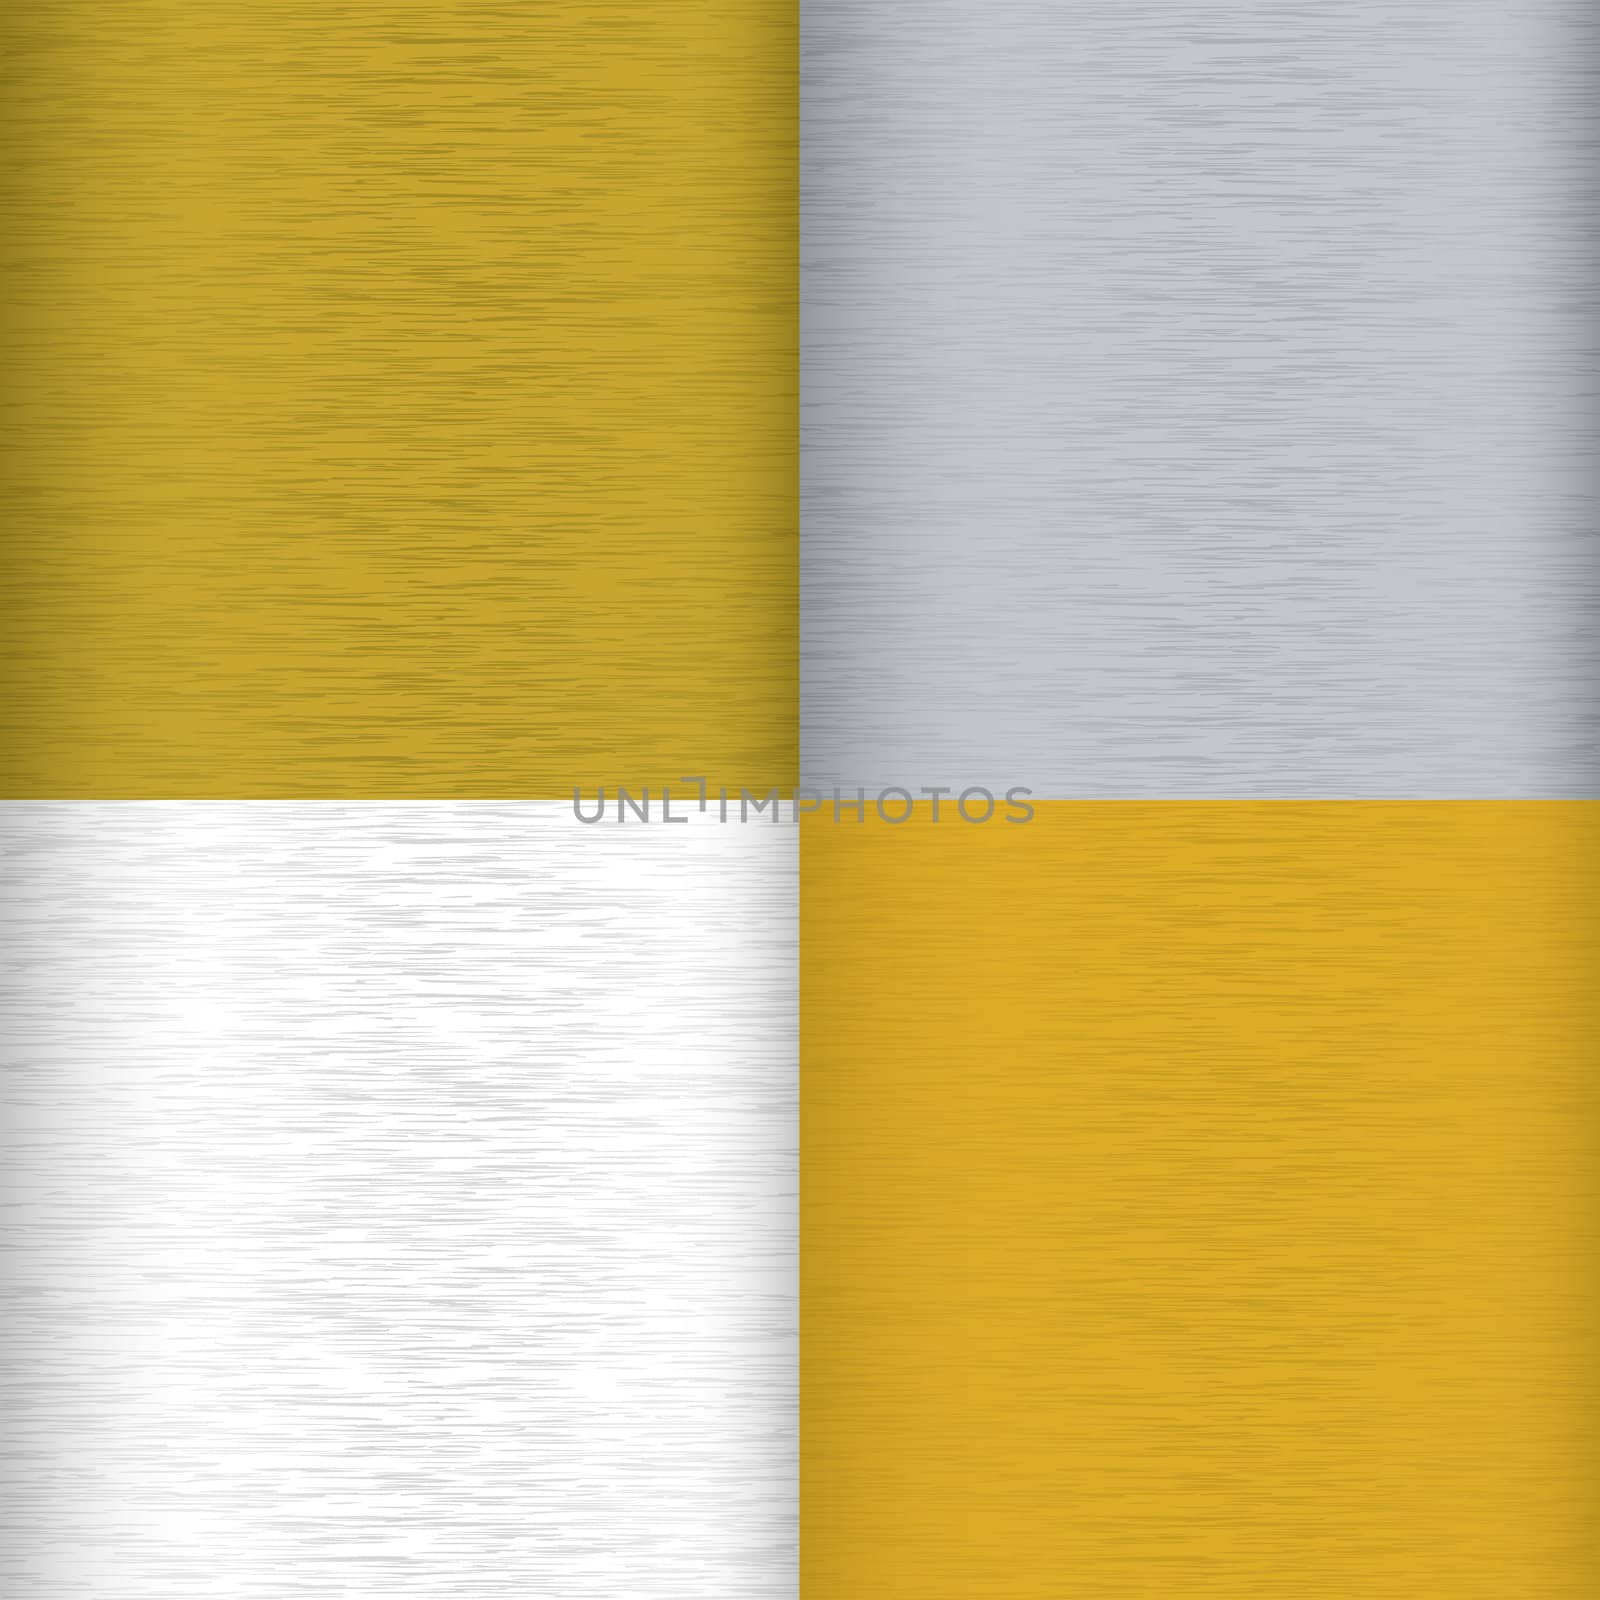 Four brushed metal background surfaces with color variation and grain